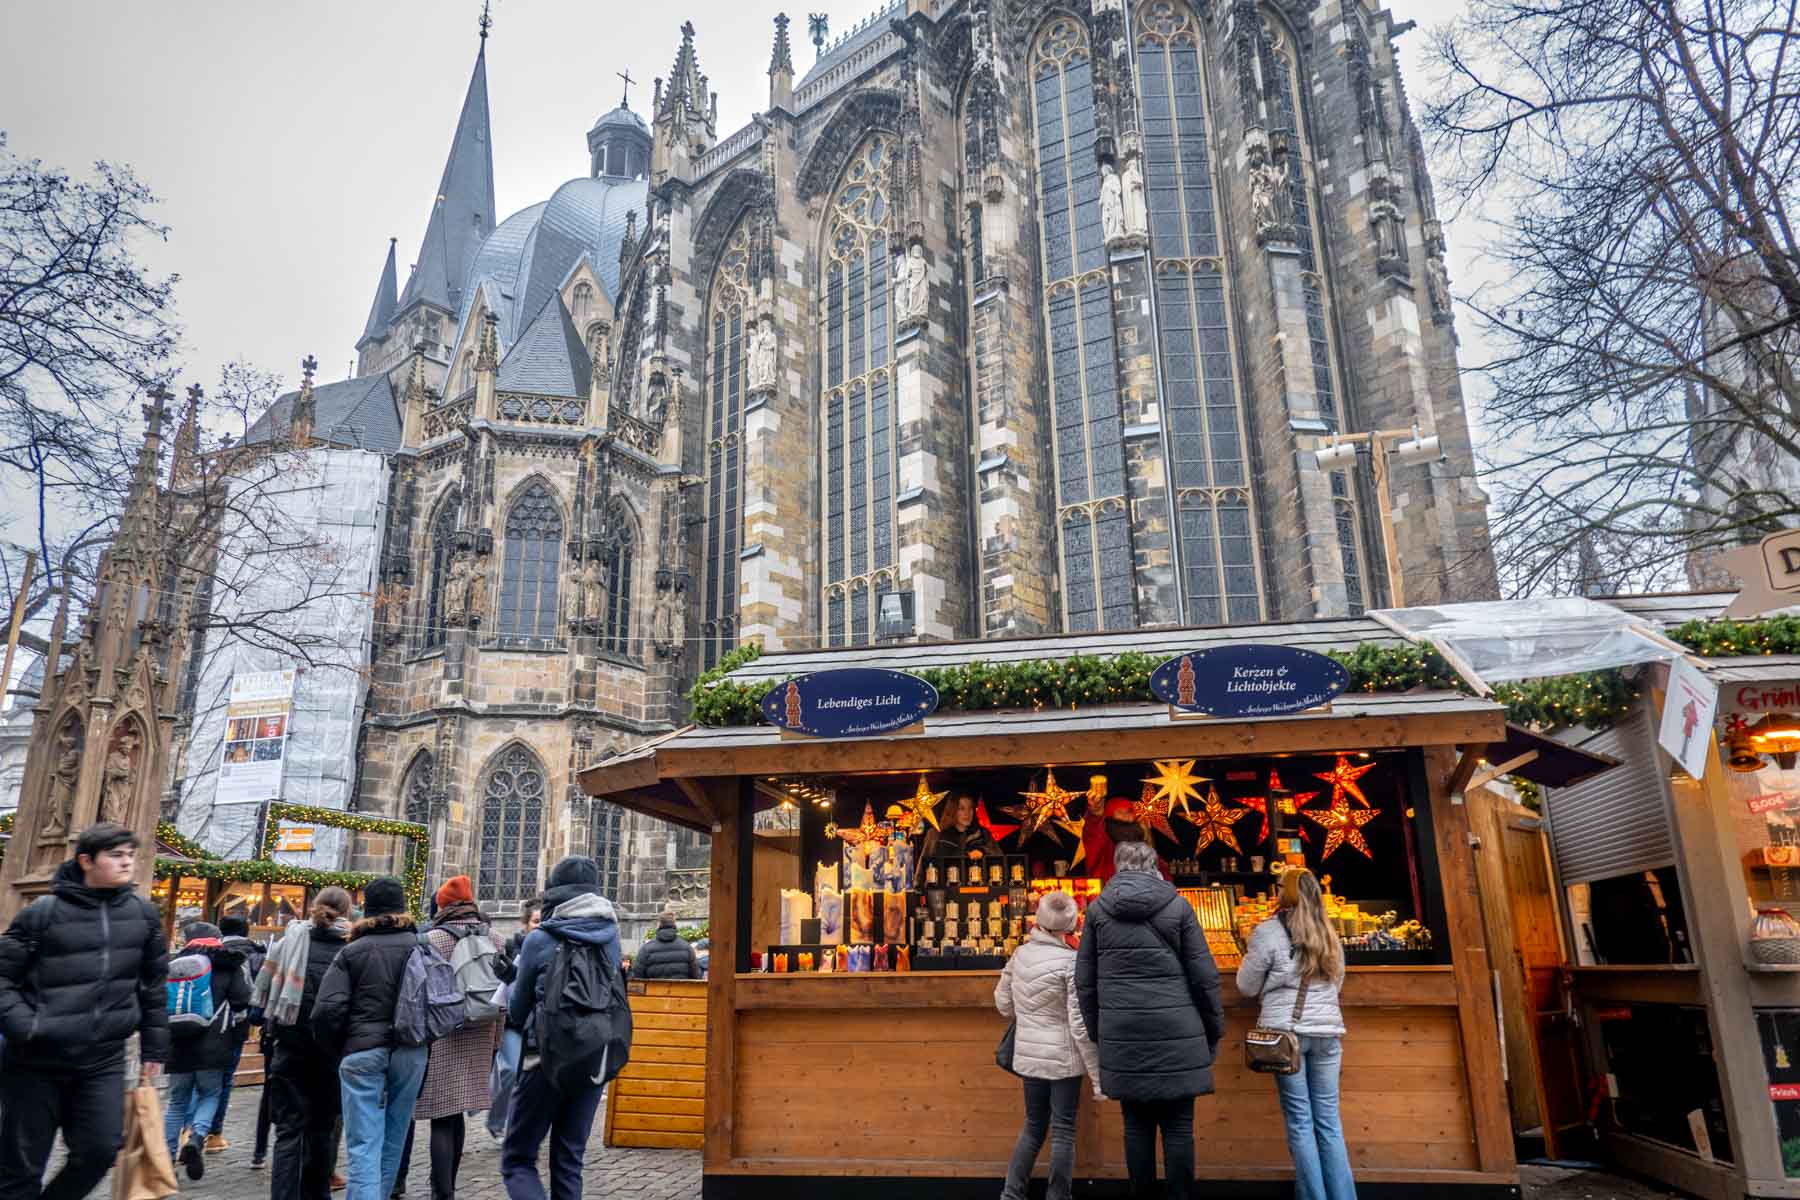 Christmas market vendor outside Aachen Cathedral